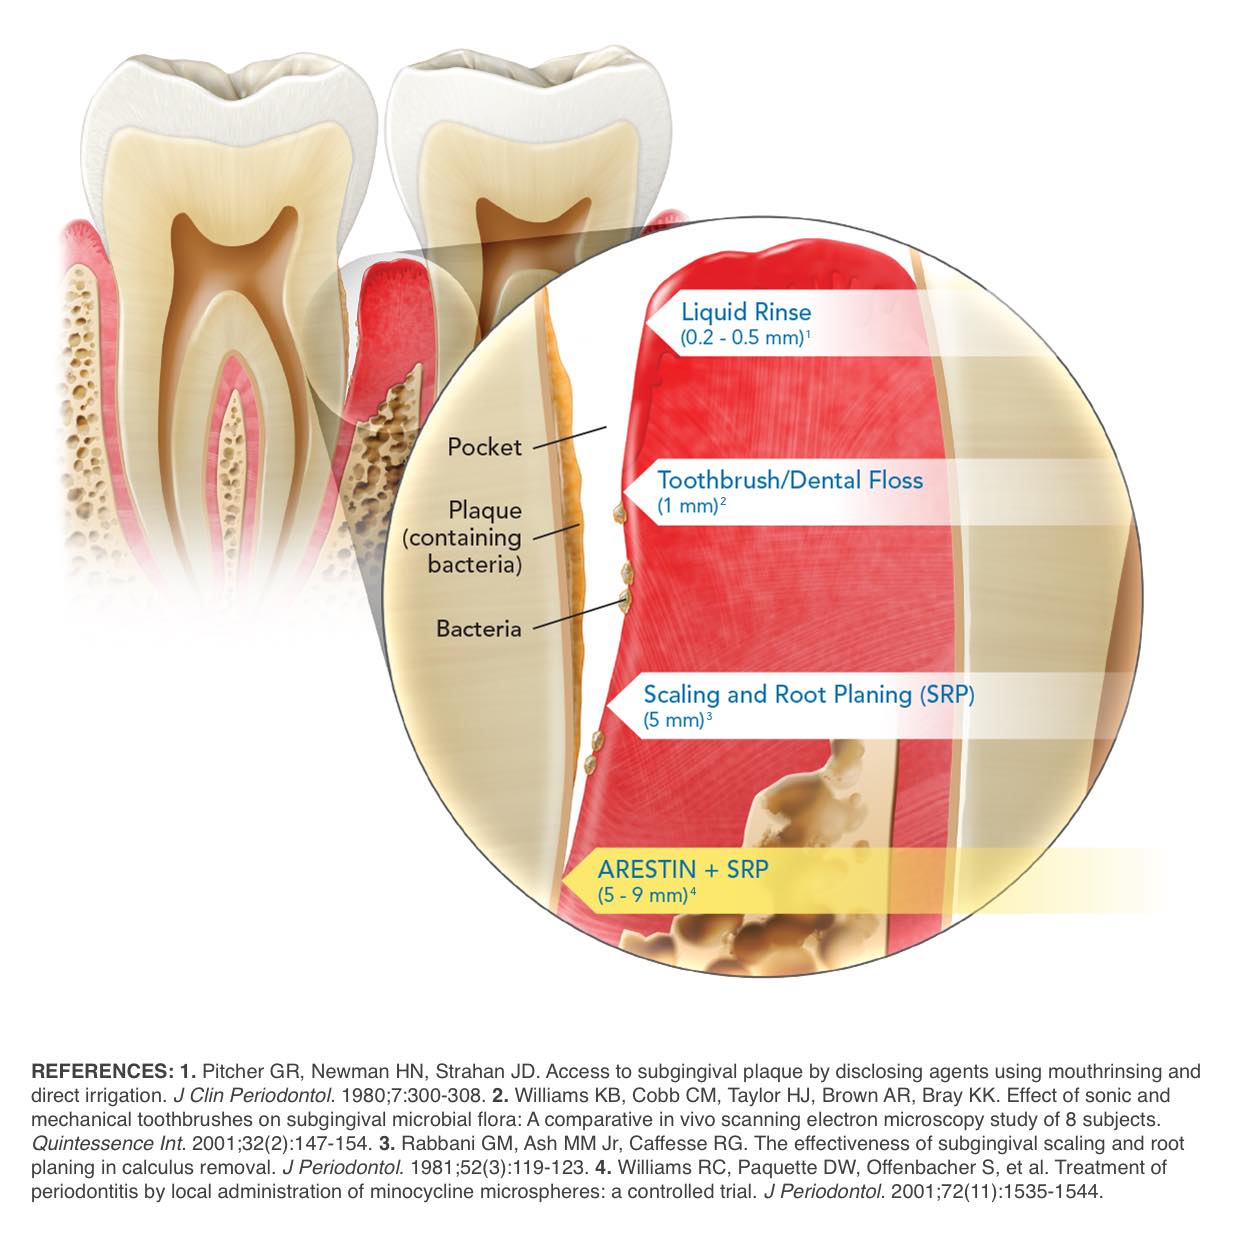 Illustration of two teeth with red gums separated from tooth and bone loss zoomed-in portion labeling the pocket, plaque, and bacteria on the left side with lines to area on the right side there are section arrows starting at the top Liquid Rinse 0.2-.5 mm, Followed by Toothbrush/ Dental floss 1mm, Scaling and Root Planing SRP 5mm, Arestin + SRP 5-9mm